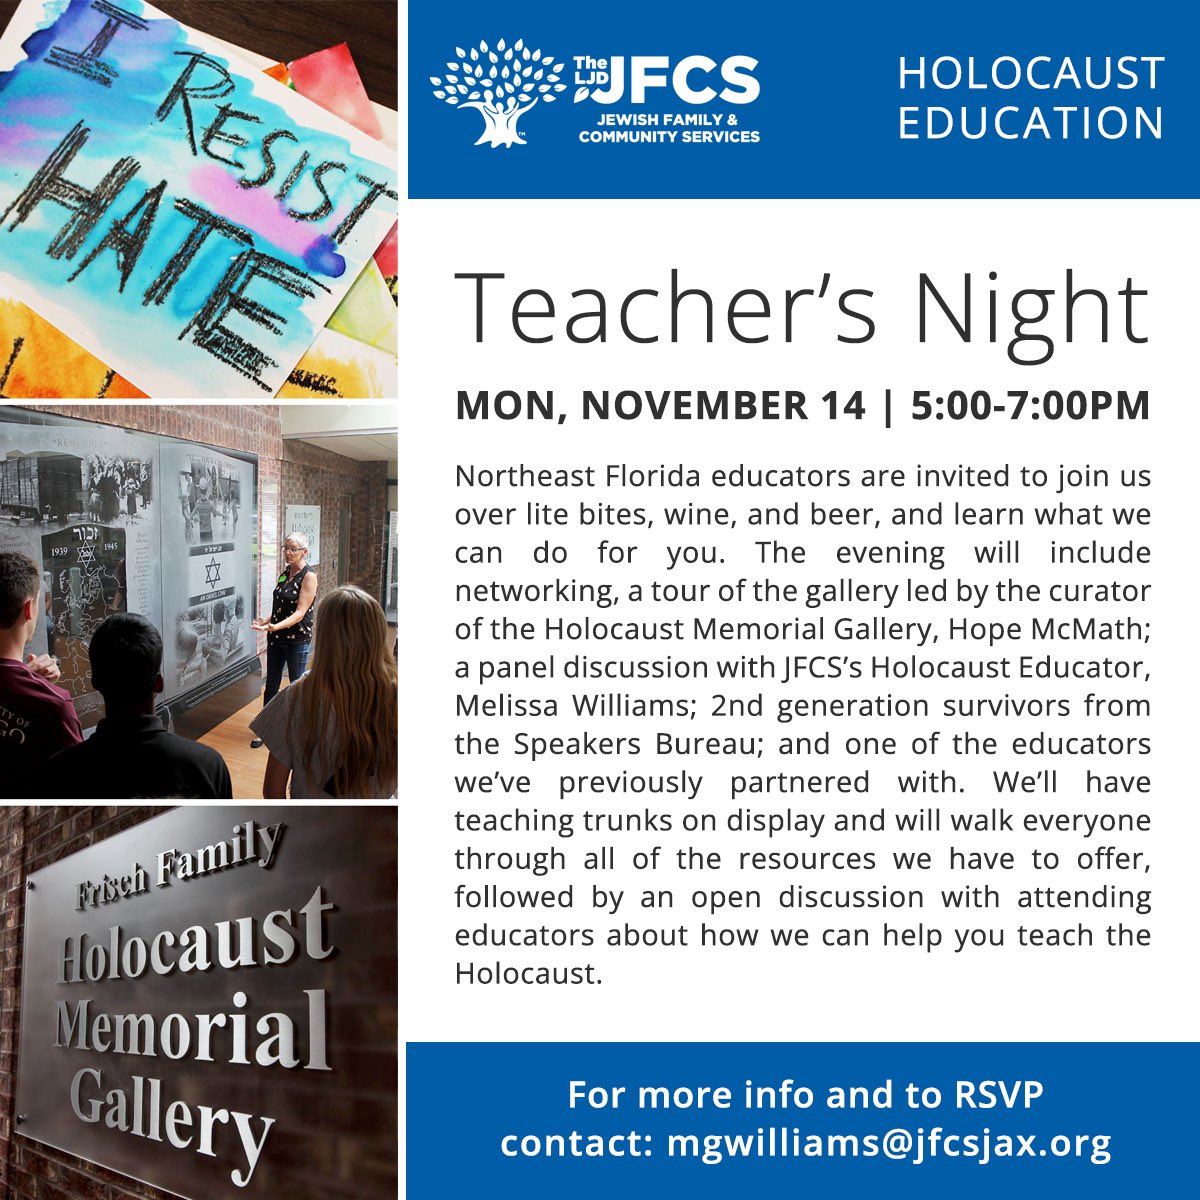 I’m part of hosting Teacher Nights at the Holocaust Memorial Gallery at @JFCSJax. It's a chance for educators-in traditional classrooms or in community settings-to hear from Survivors, tour the gallery, and explore resources we have for those doing the work of teaching truth. 1/3